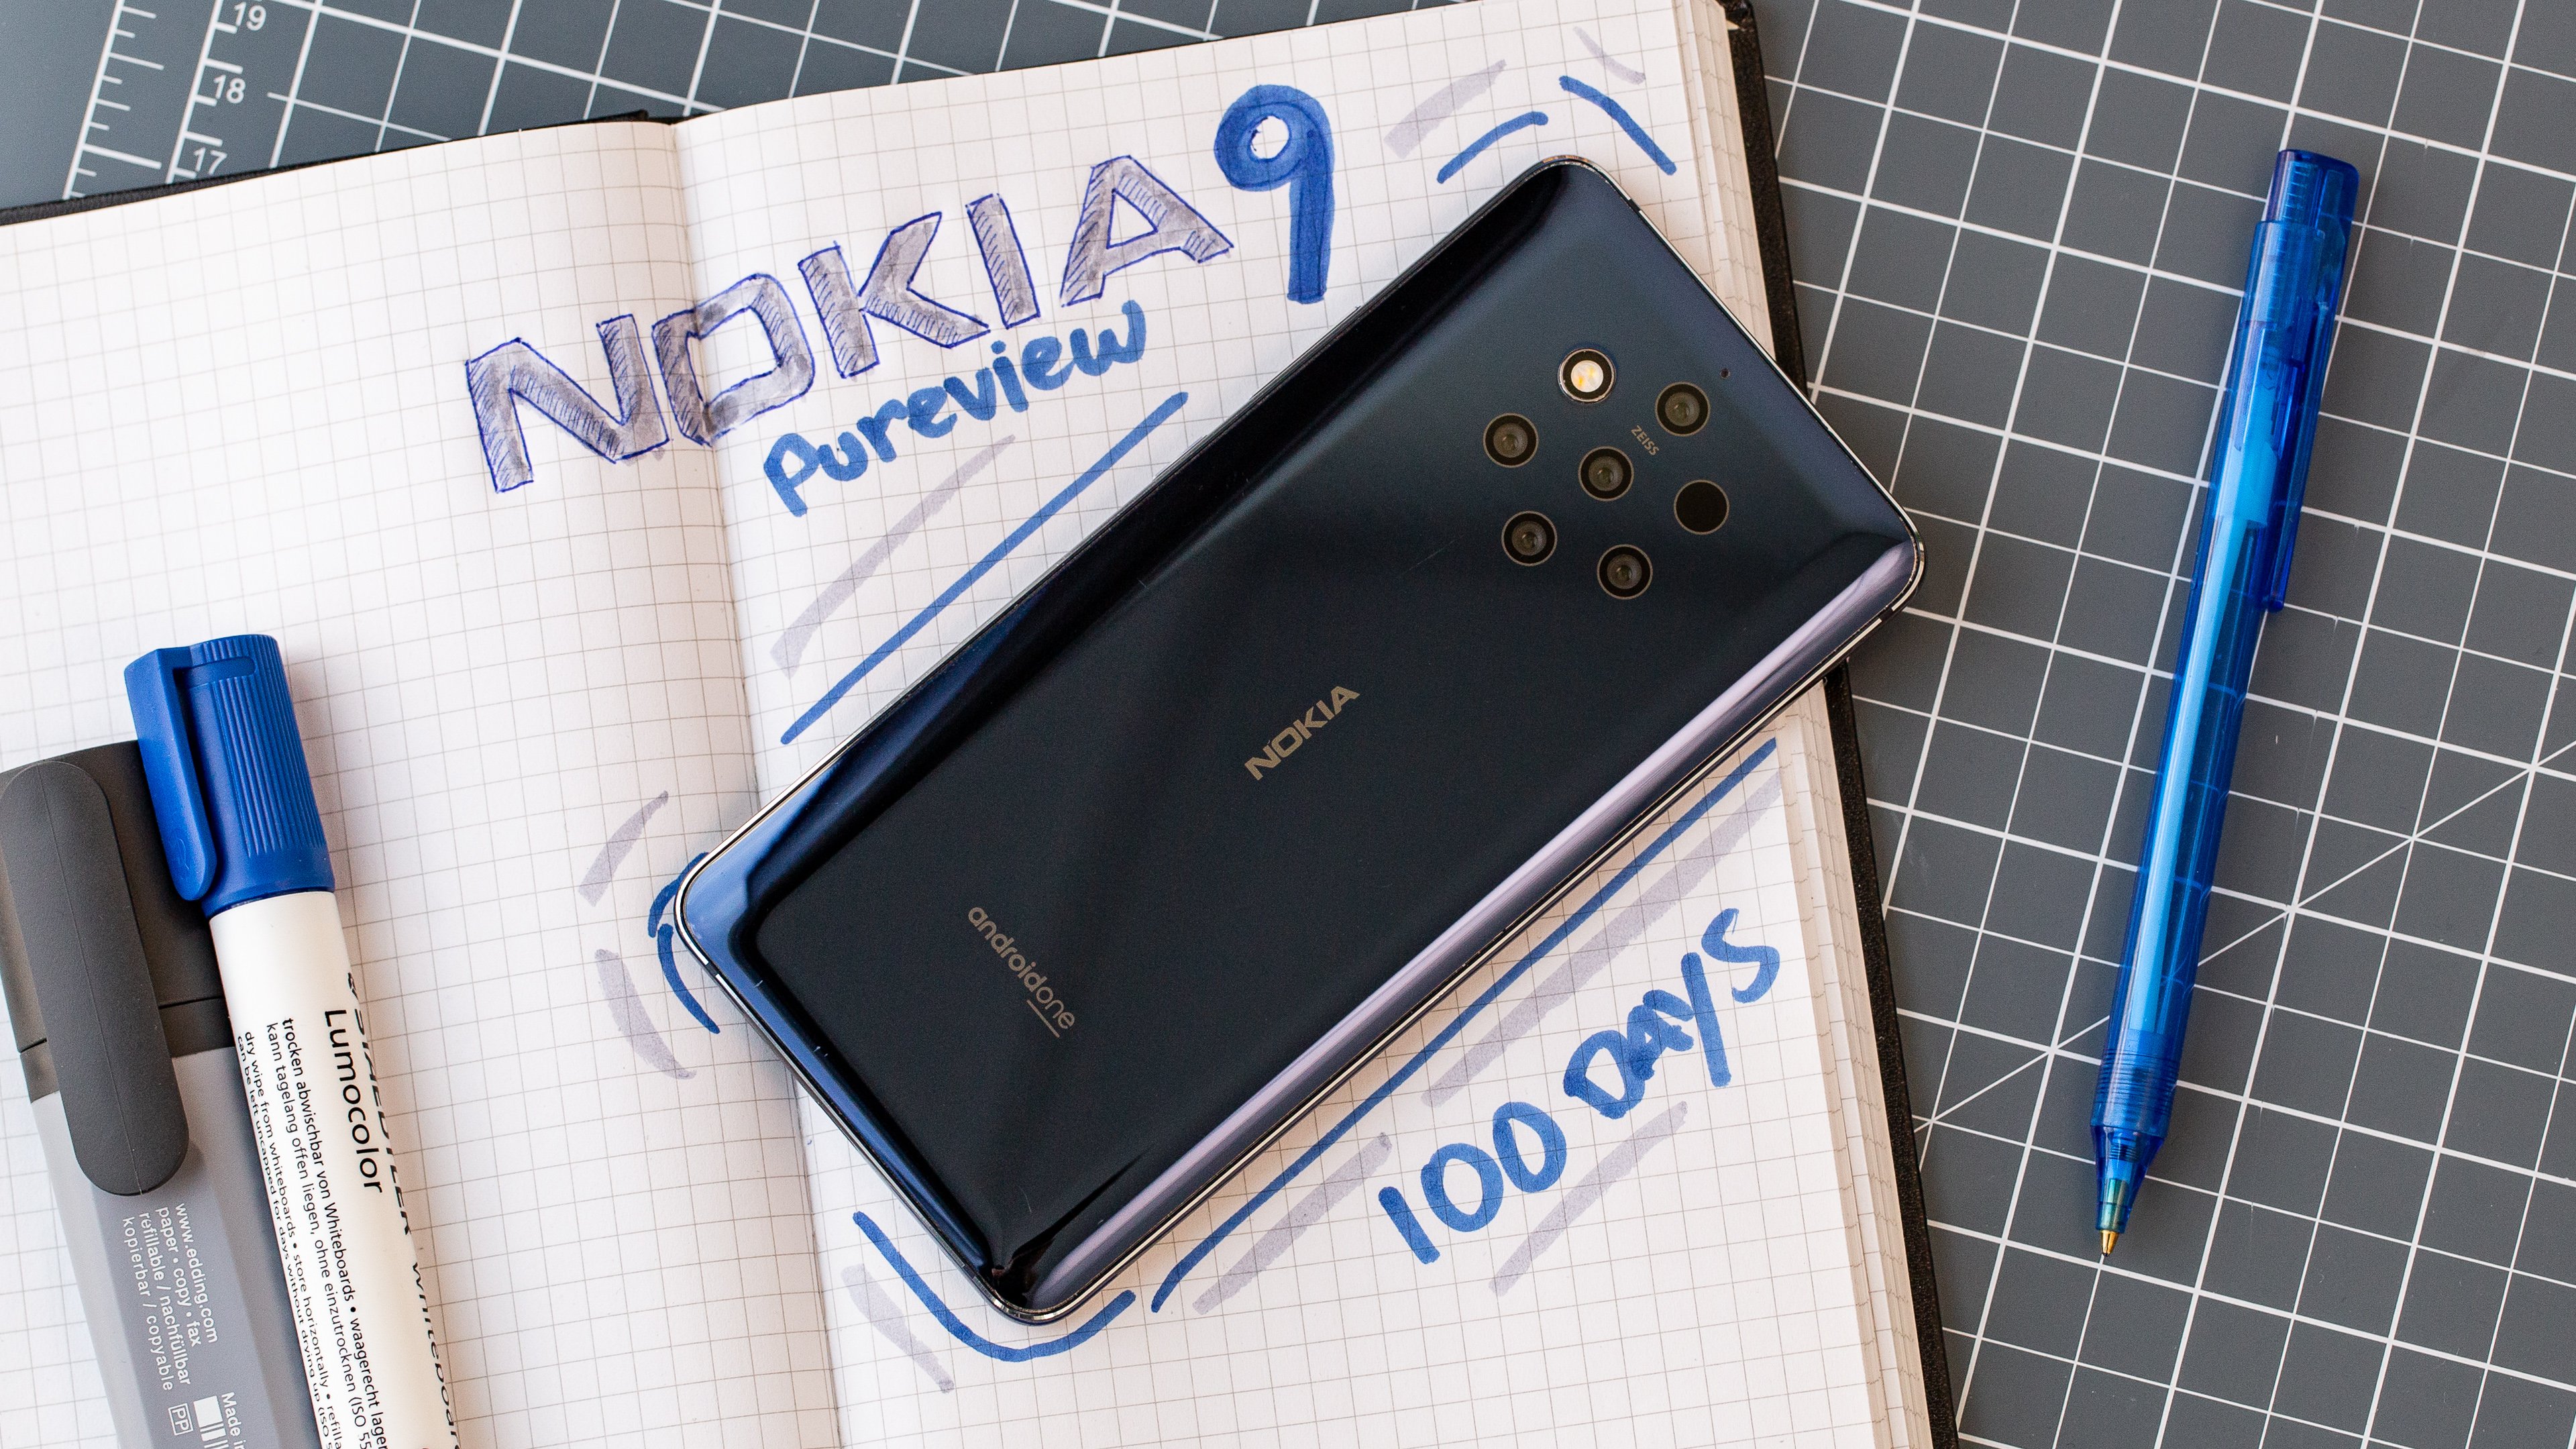 Turn GPS on your Nokia 6 Android 7.1 on or off